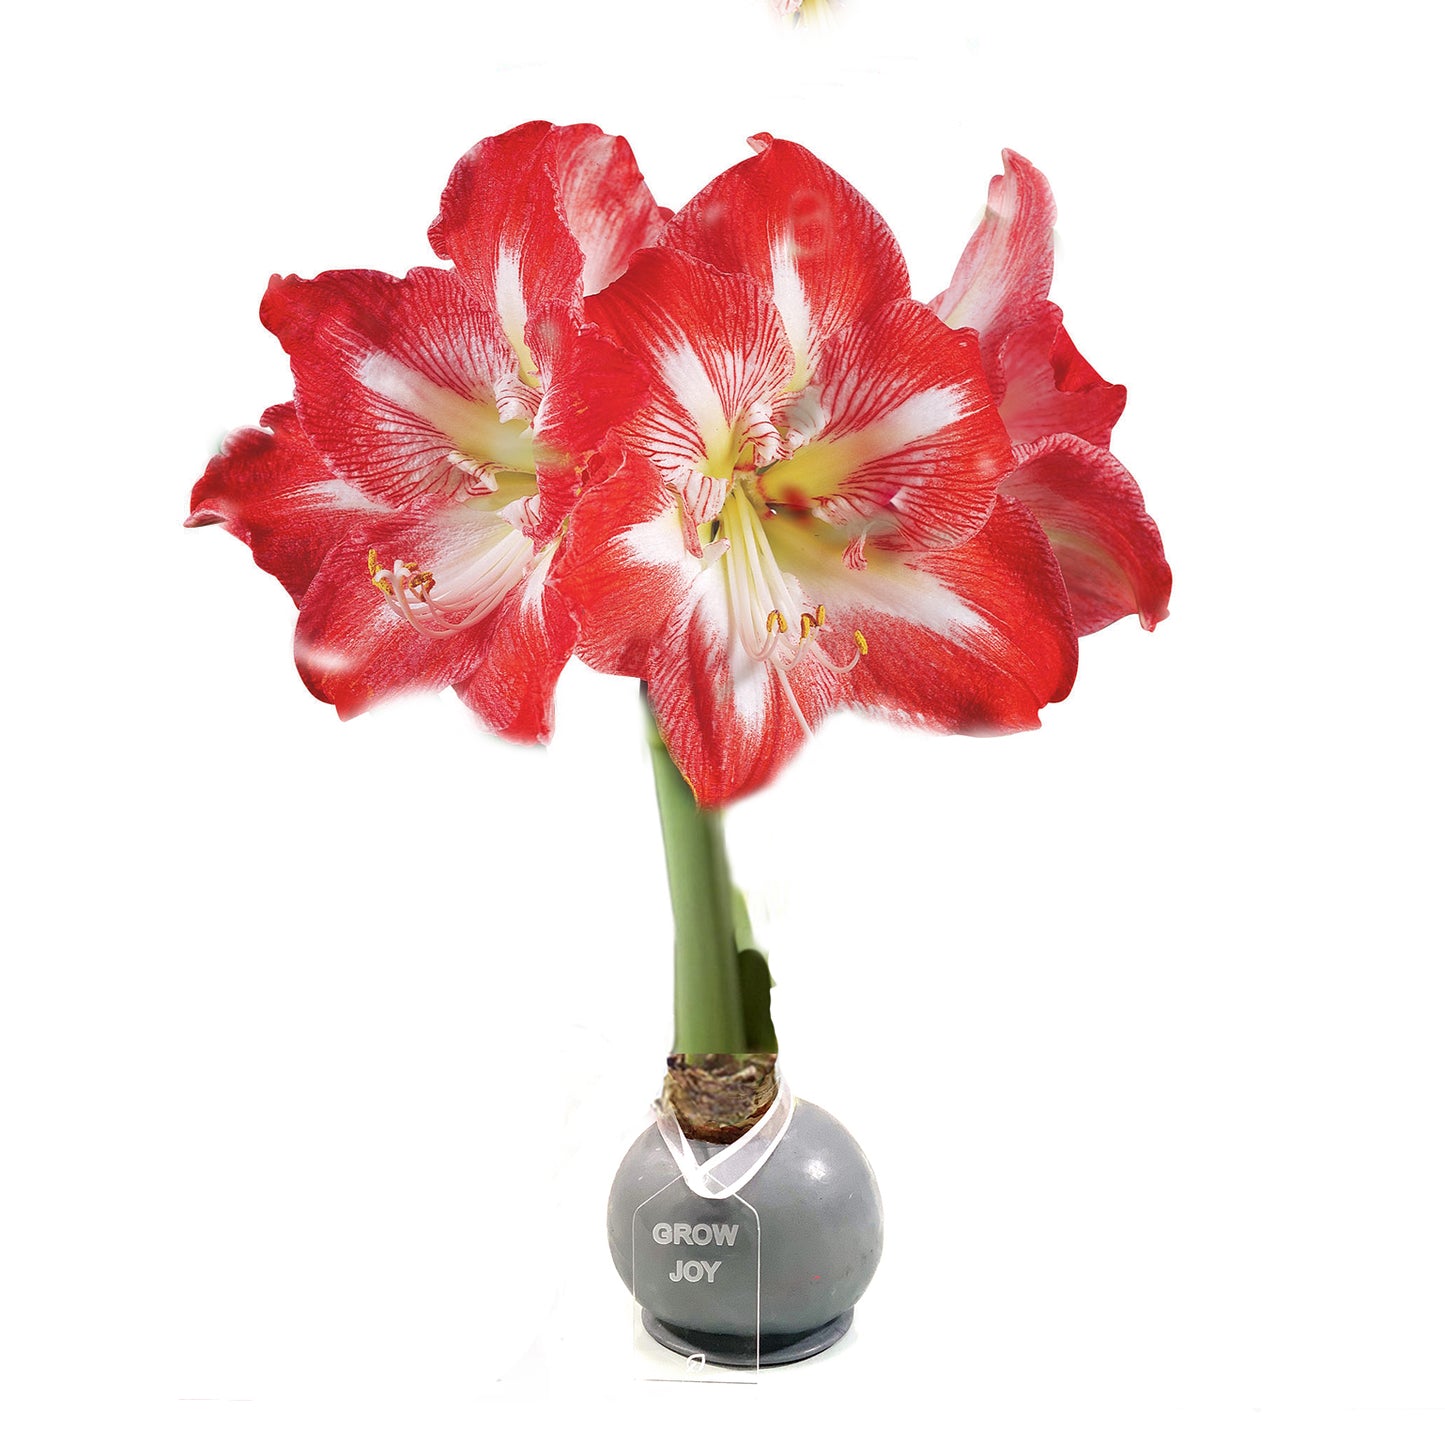 Silver Waxed Amaryllis Bulb, Red Bloom - Sold Out